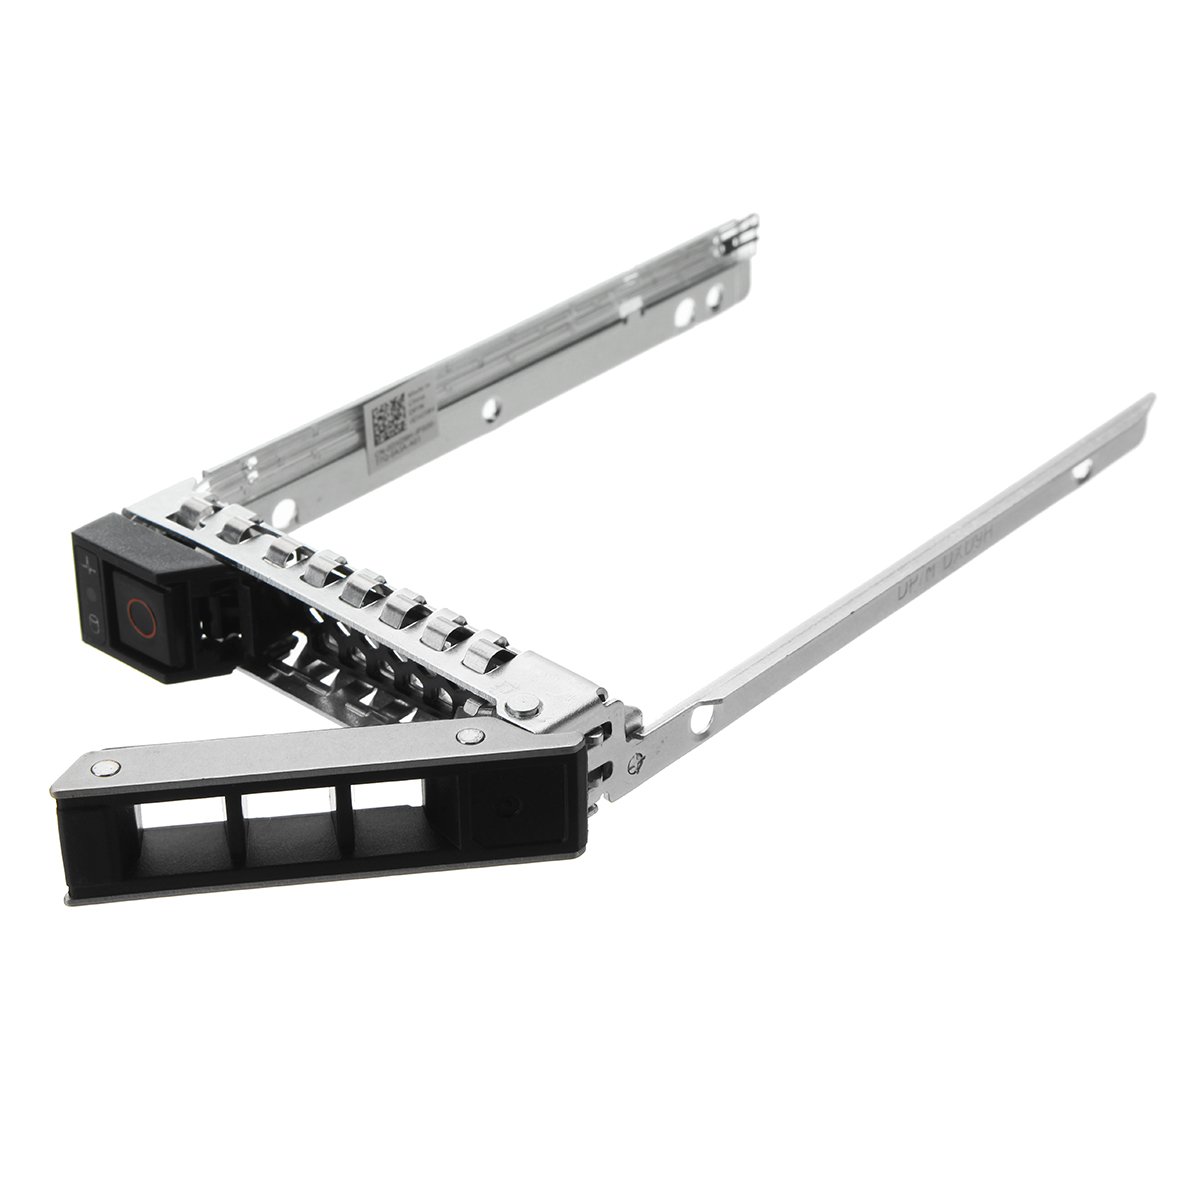 2.5'' HDD Tray Caddy for Dell DXD9H Poweredge Server R640 R740 R740XD R7415 R940 Adapter 2